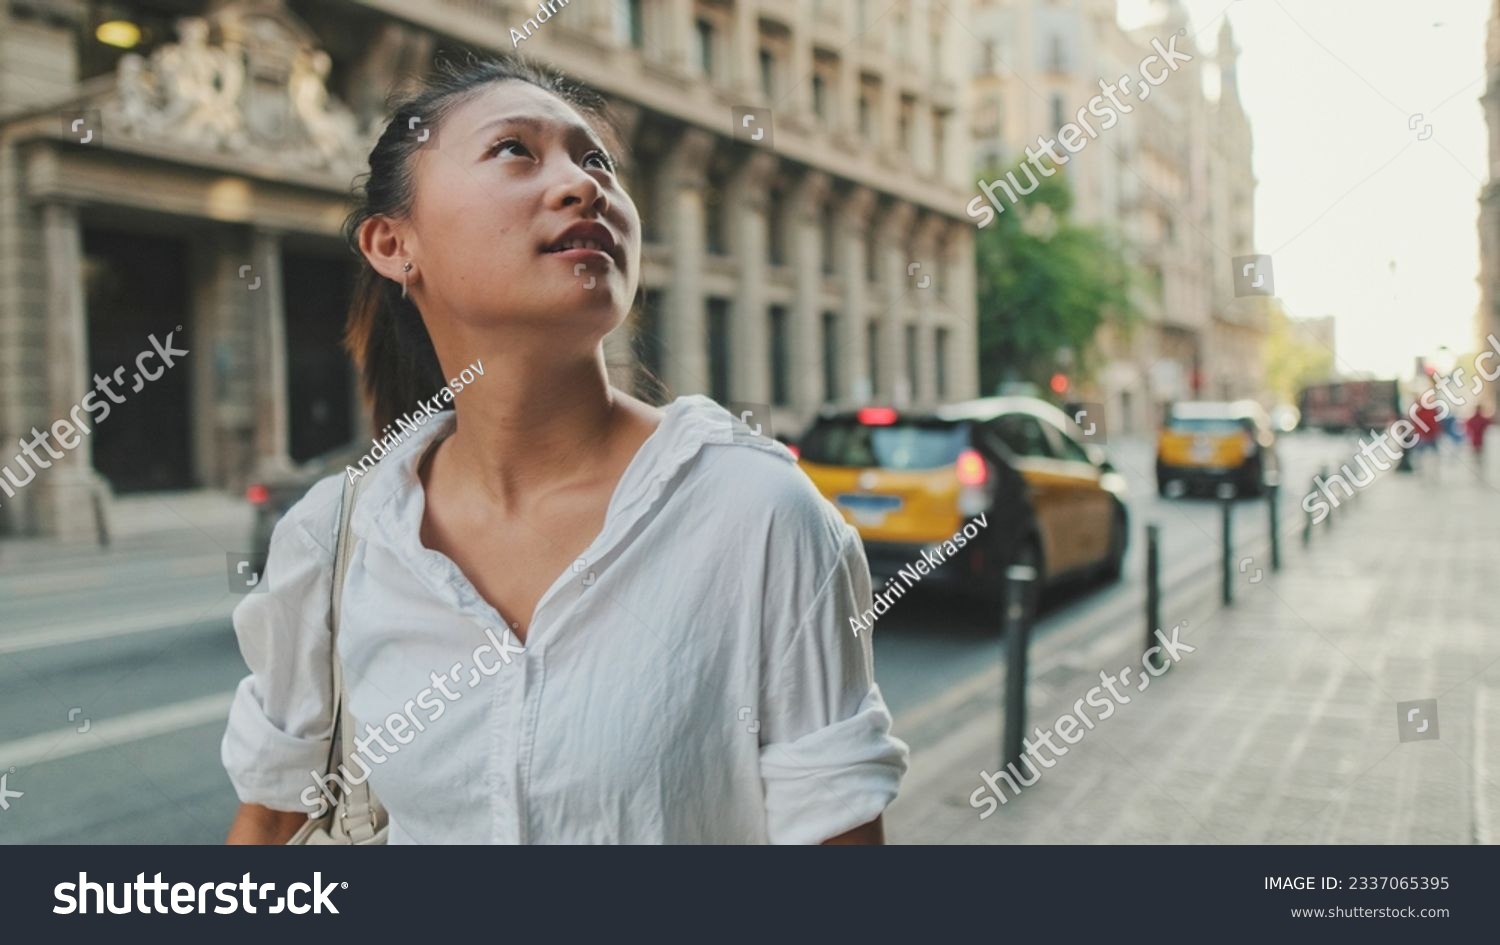 Young woman walks down the street and looks around #2337065395